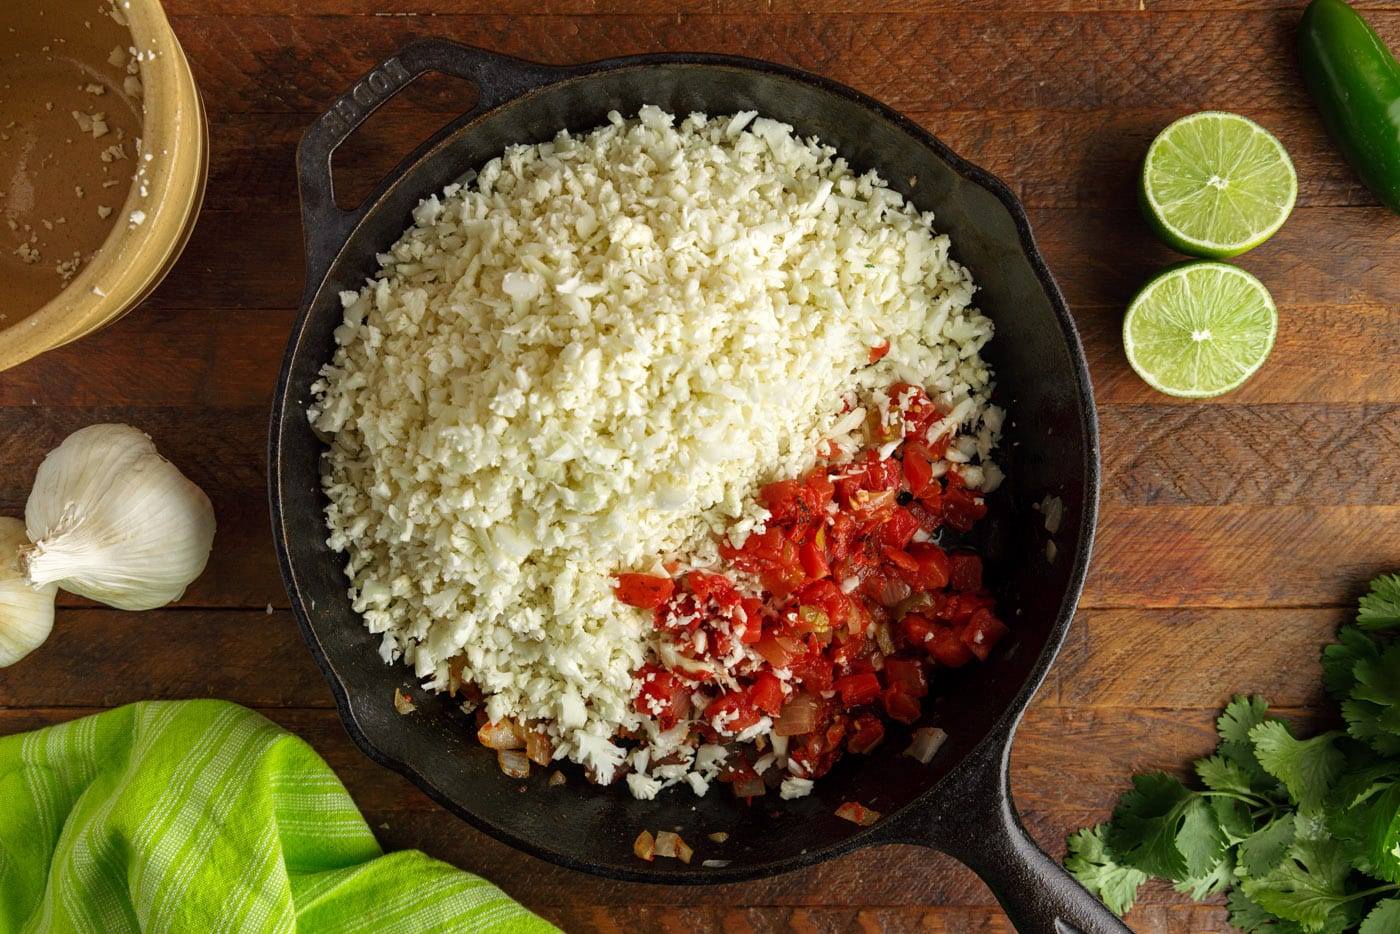 tomatoes and cauliflower rice in a skillet